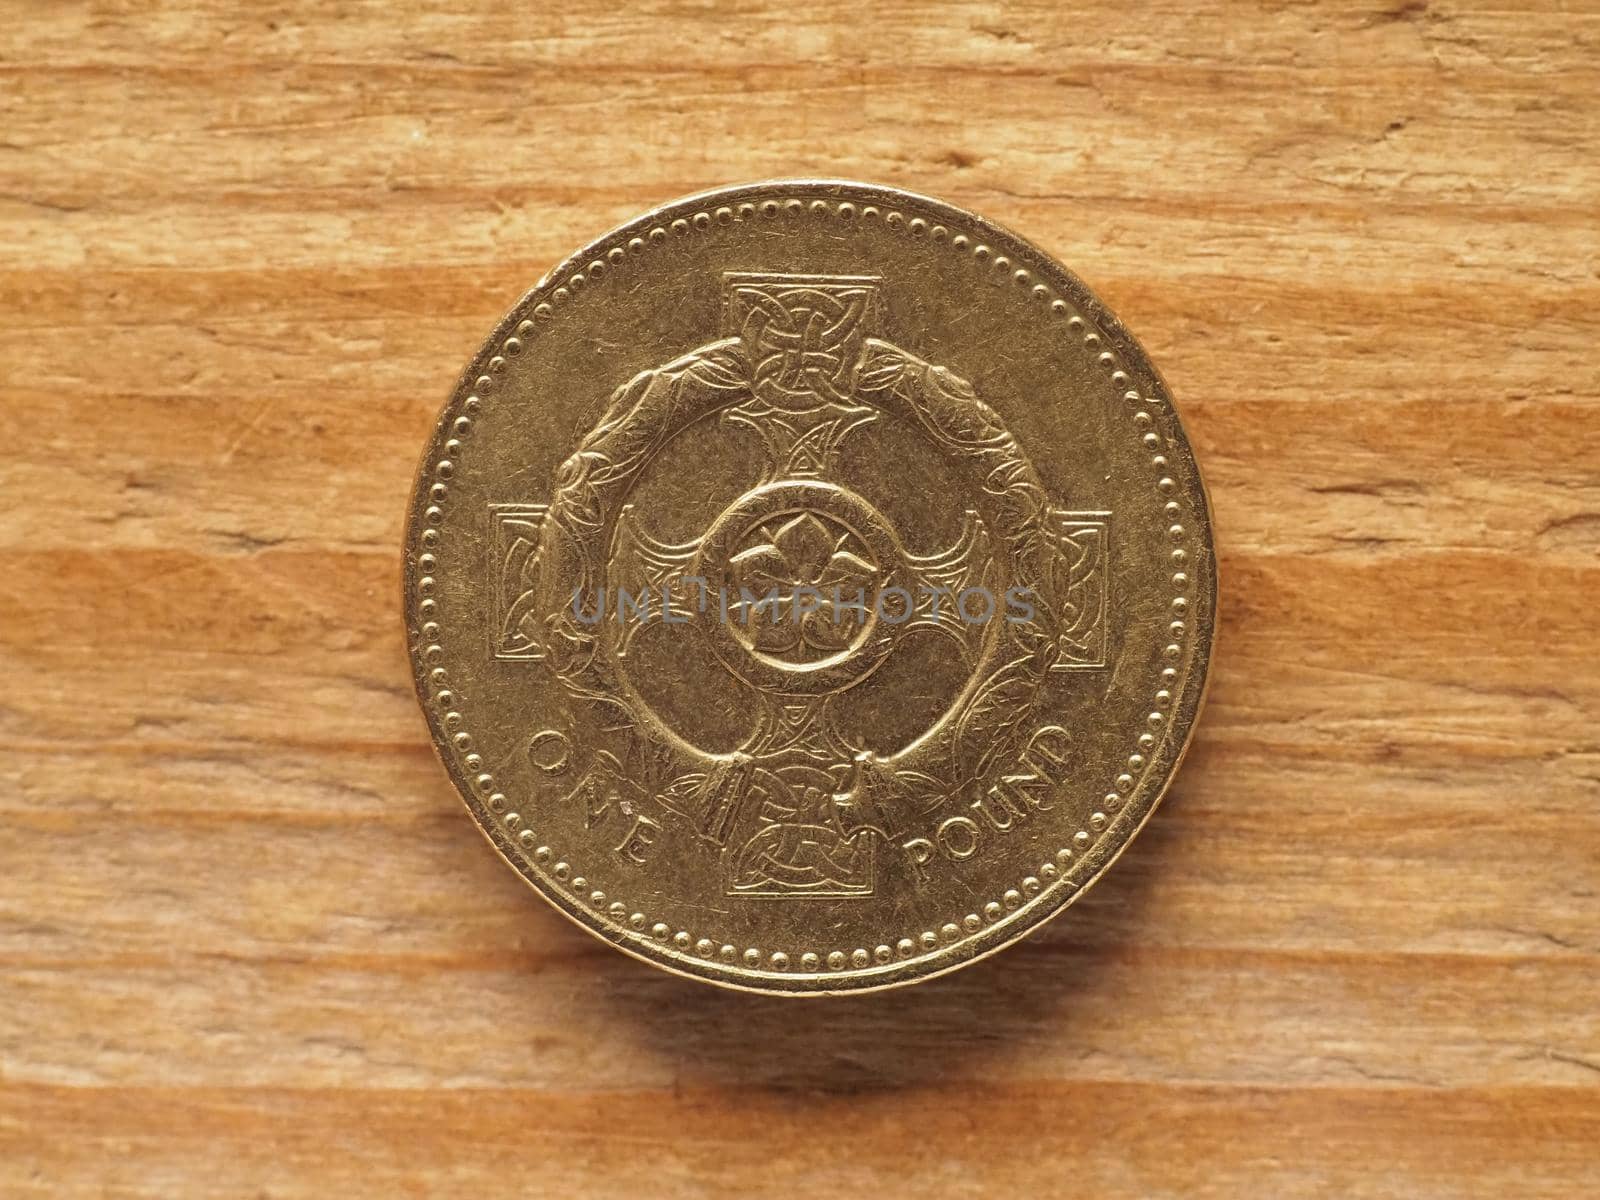 1 Pound coin, reverse side showing Celtic cross with pimpernel flower and torc representing Northern Ireland, currency of the UK by claudiodivizia